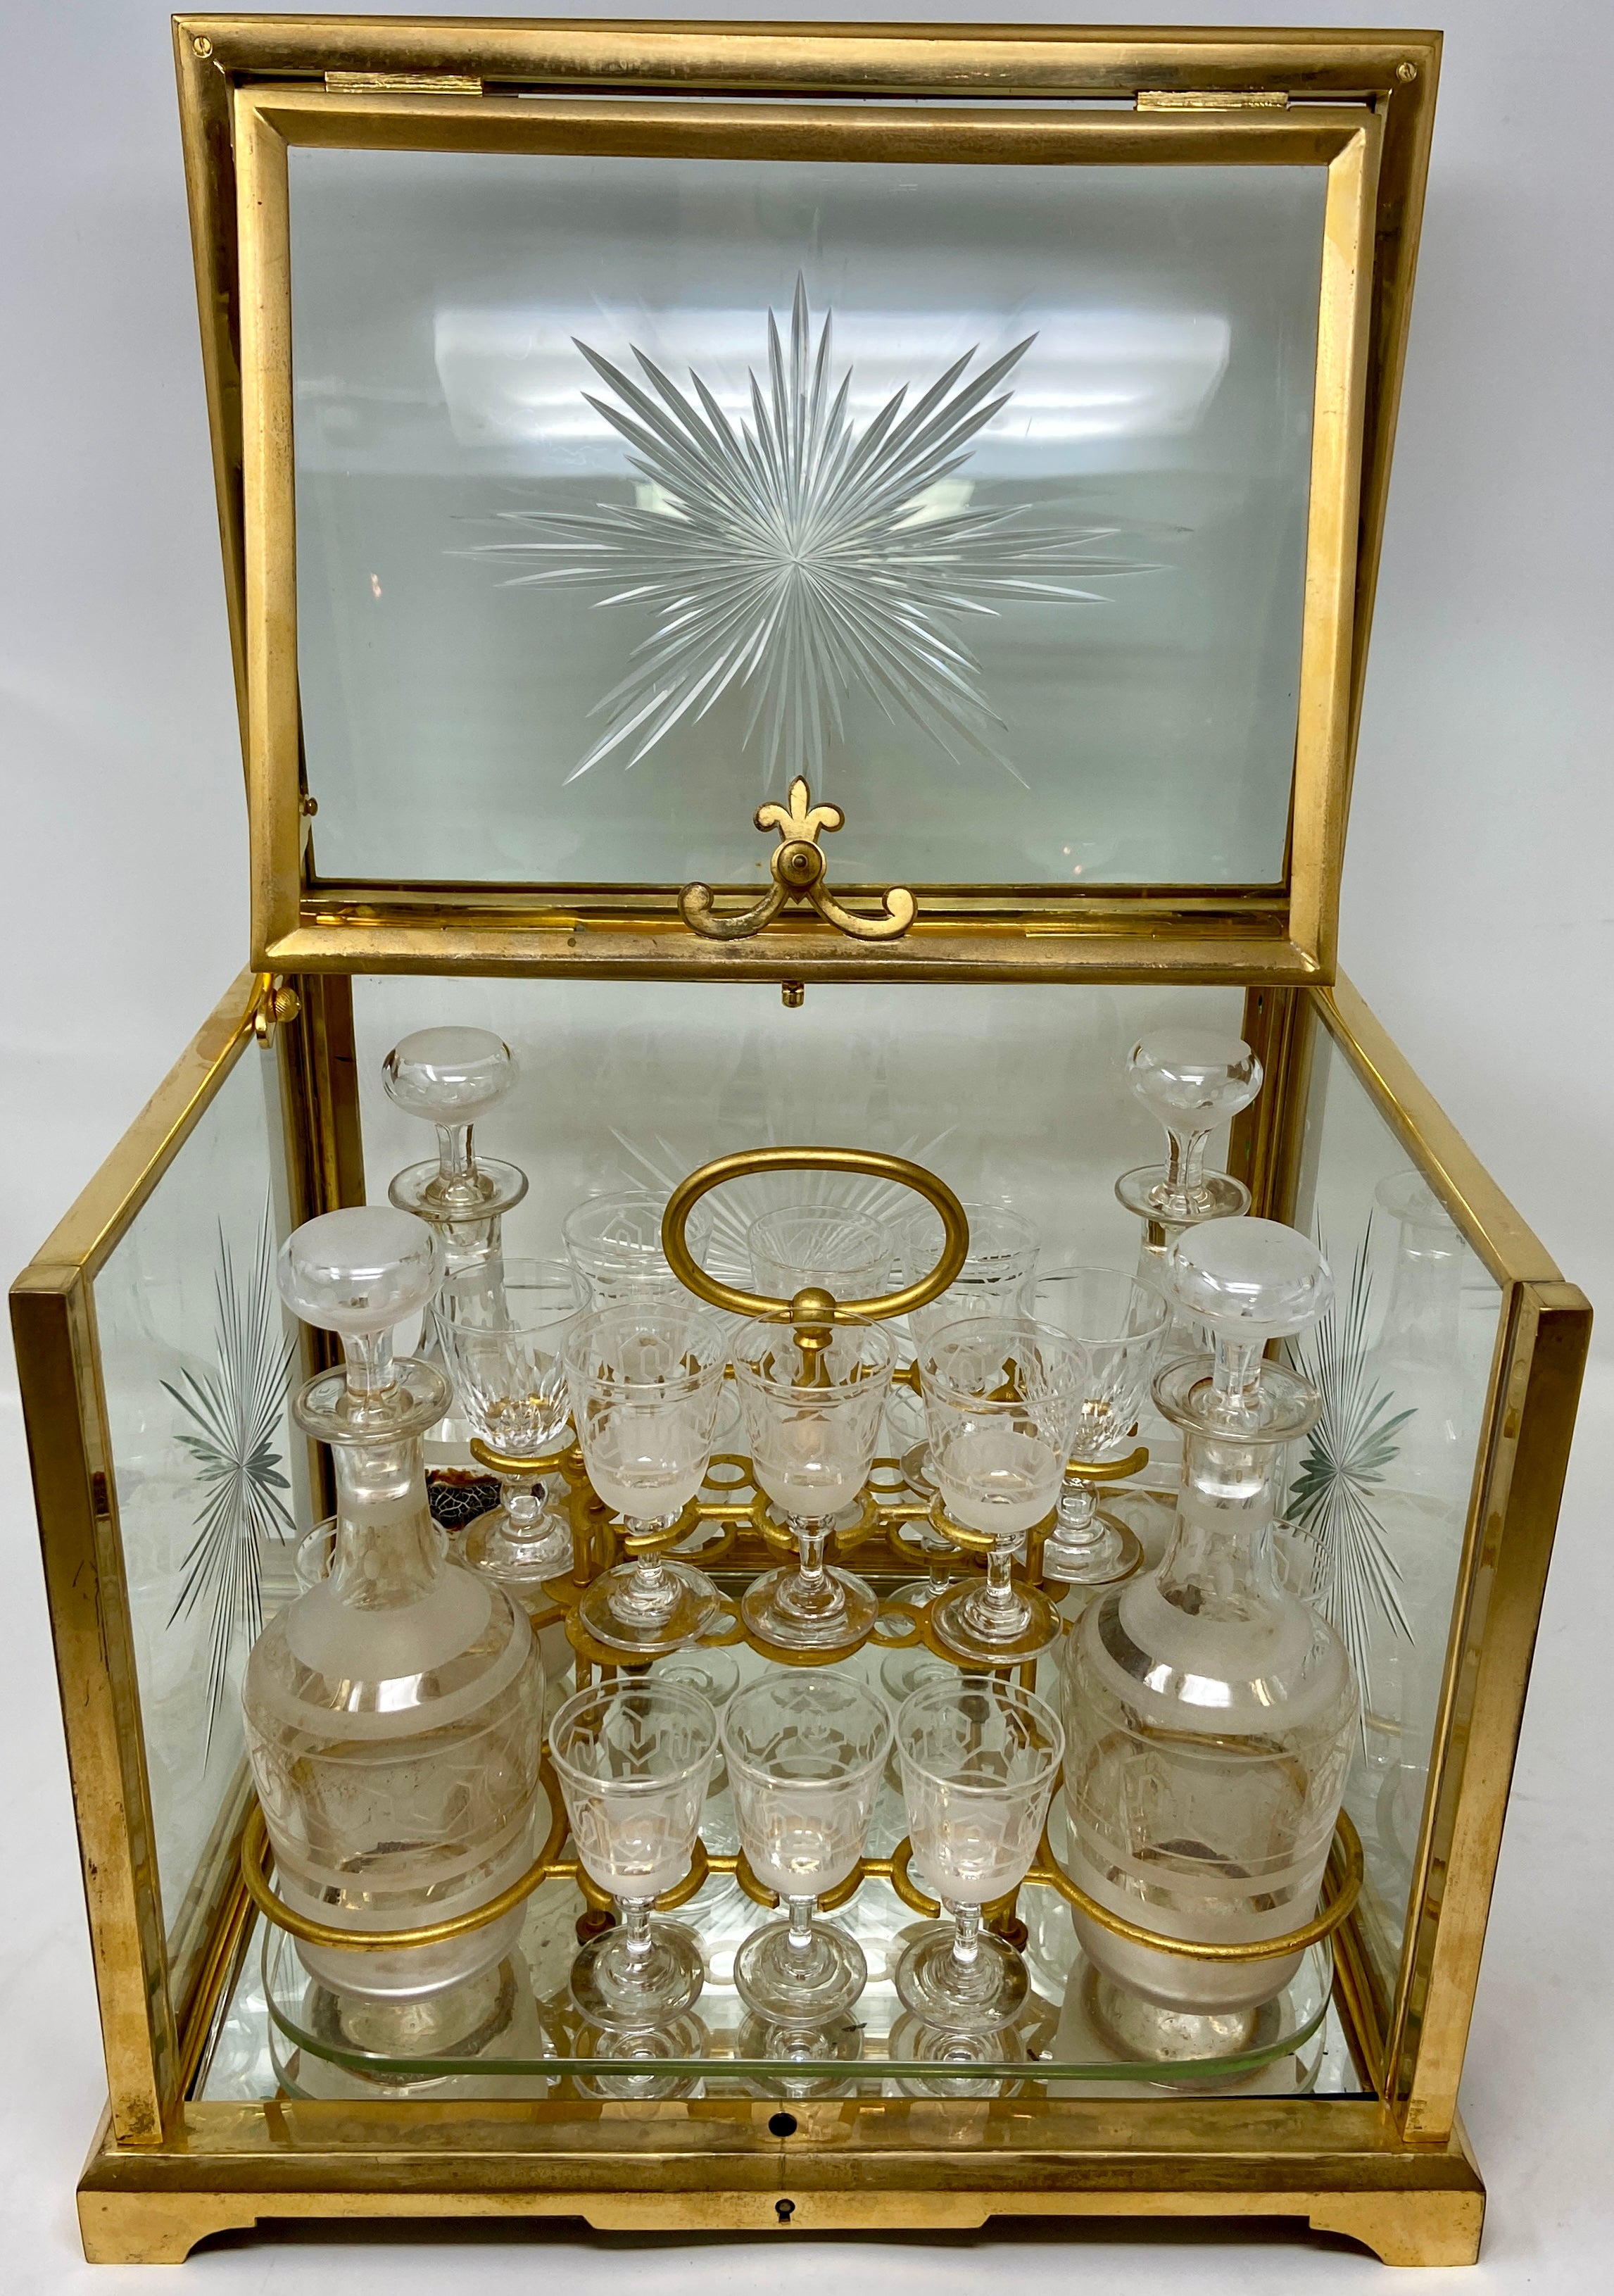 Antique French Baccarat Crystal and Bronze D' Ore Cave À Liqueur, Circa 1890. Fully fitted interior with 4 crystal decanters and 16 cordials
Per photos 12/15 and 13/15, 2 of the crystal cordials were at one point replaced. All other pieces are